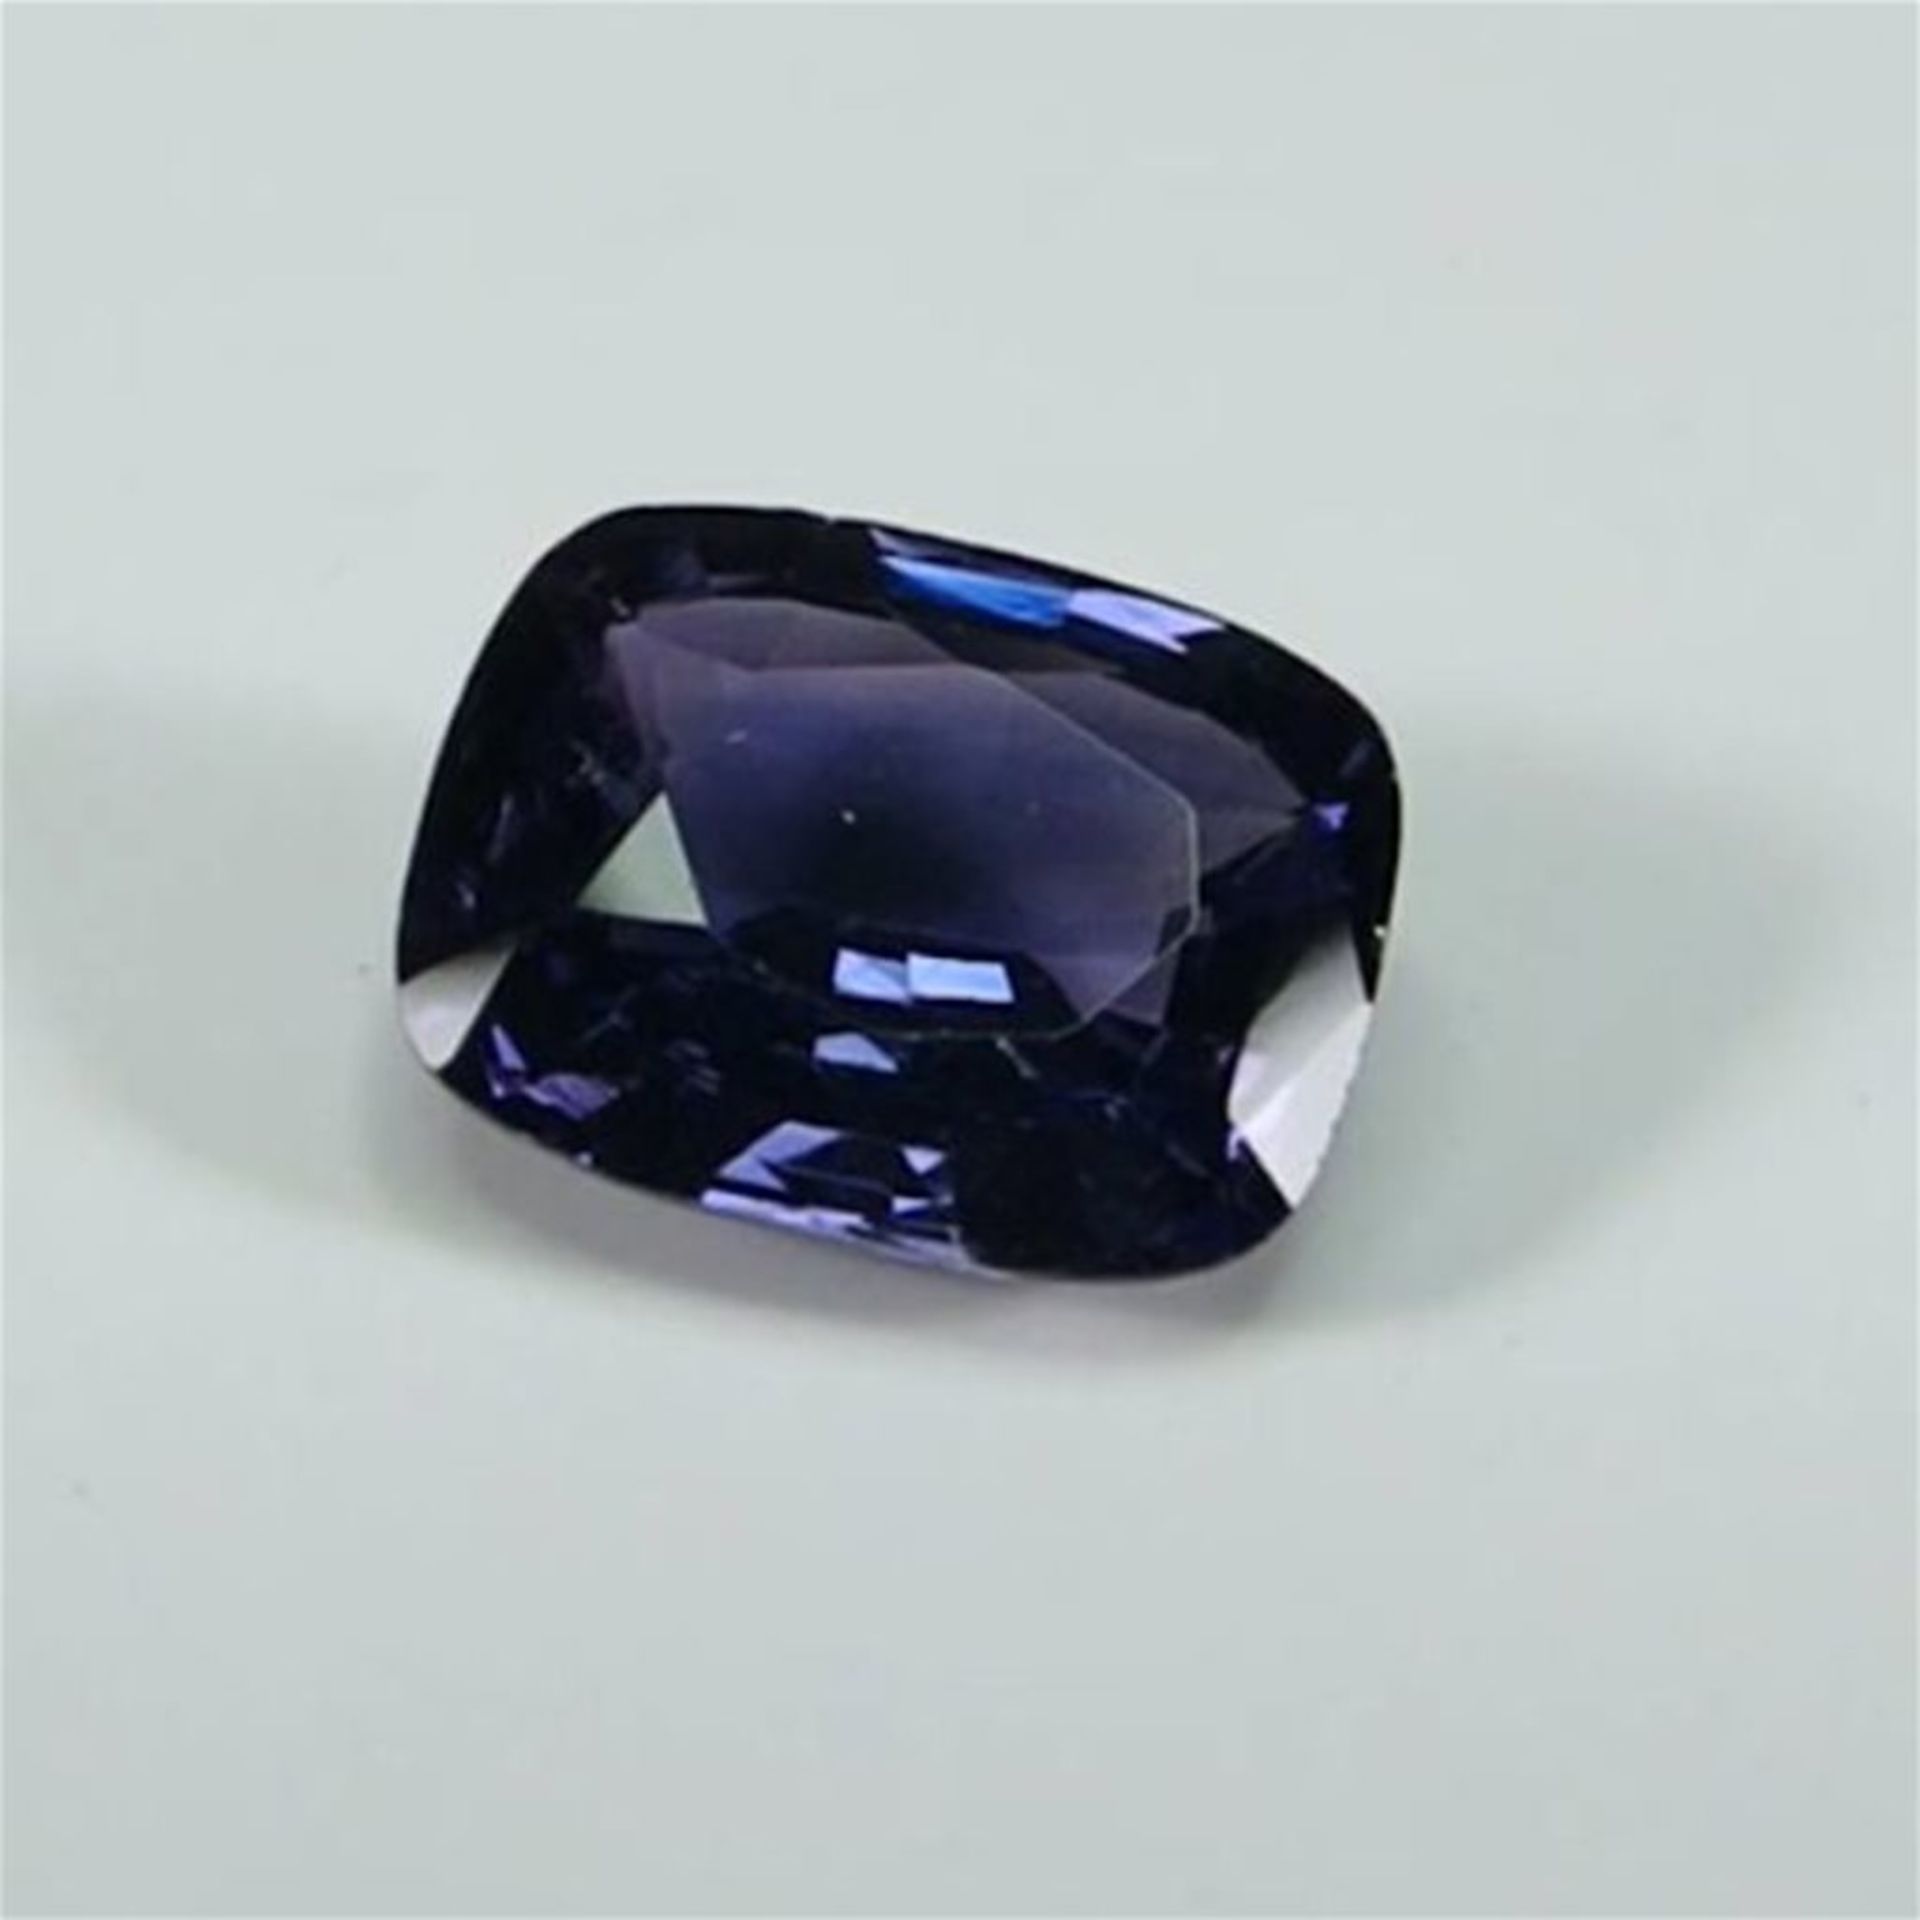 GIA Certified 2.90 ct. Bluish Violet Sapphire MADAGASCAR - Image 3 of 10